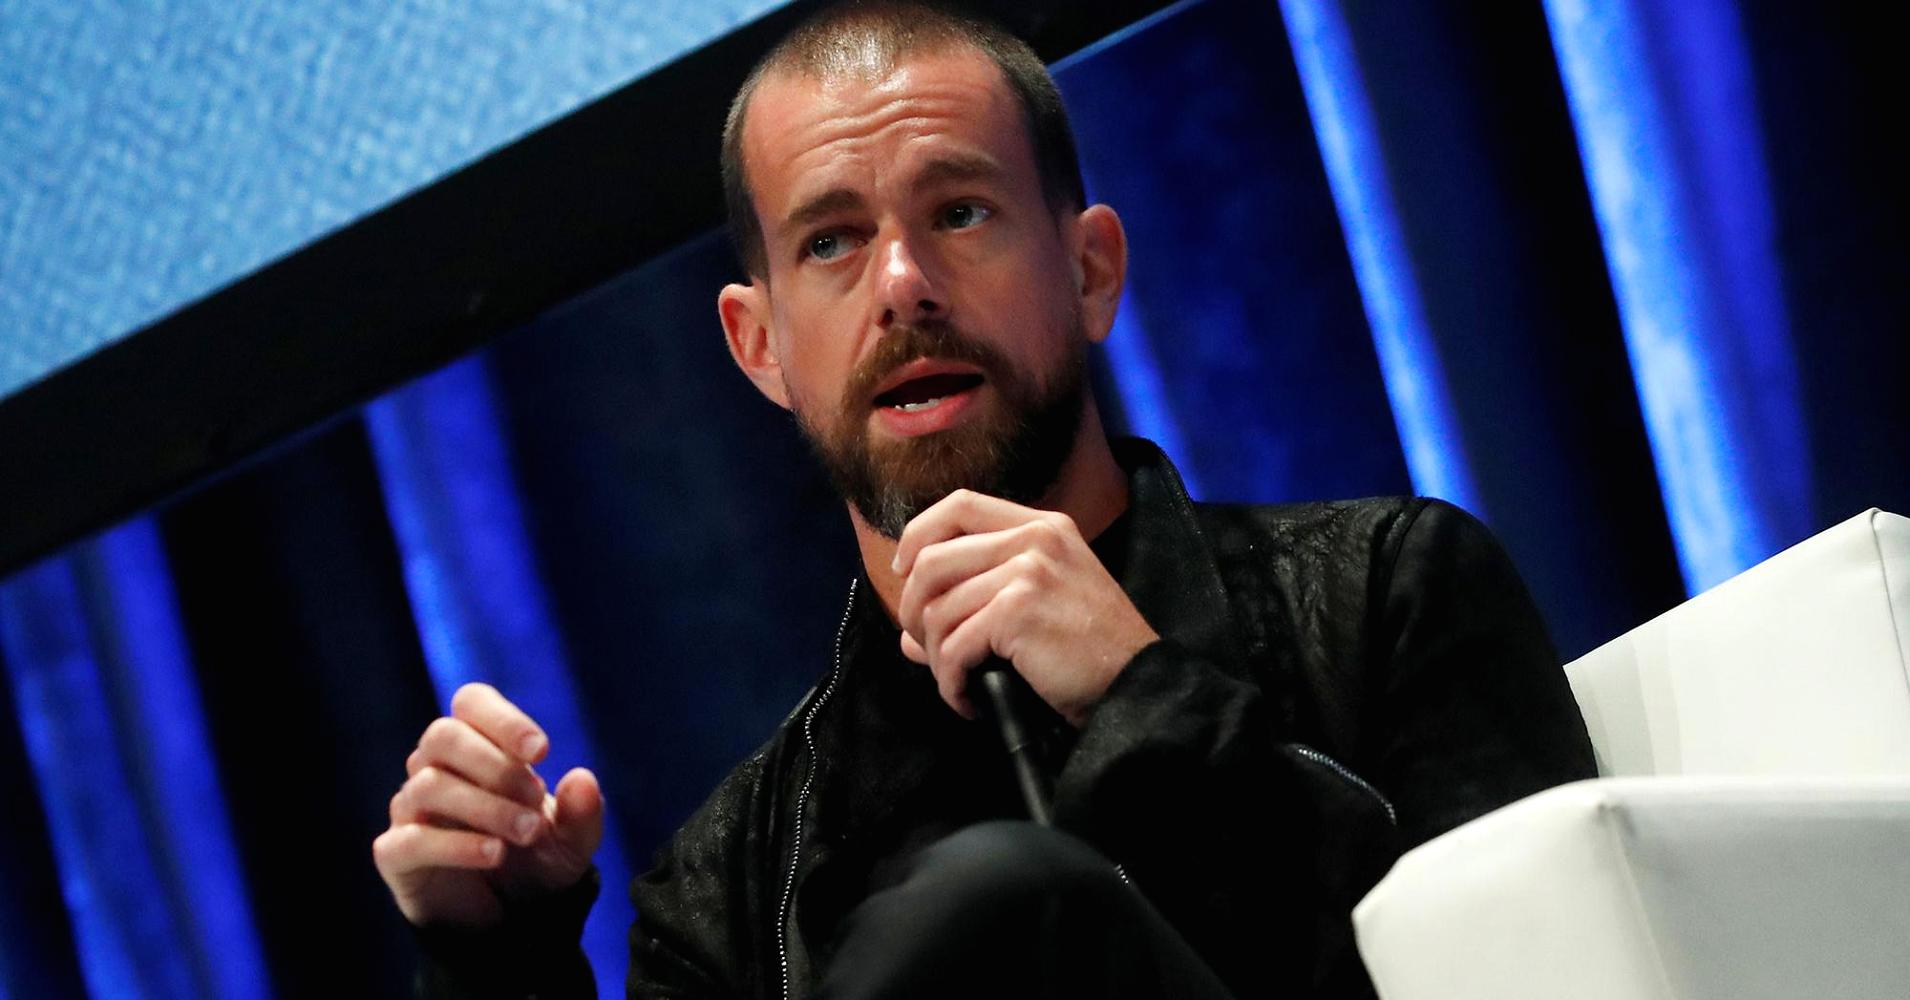 Jack Dorsey, CEO and co-founder of Twitter and founder and CEO of Square, speaks at the Consensus 2018 blockchain technology conference in New York City, New York. Photo: Mike Segar/Reuters